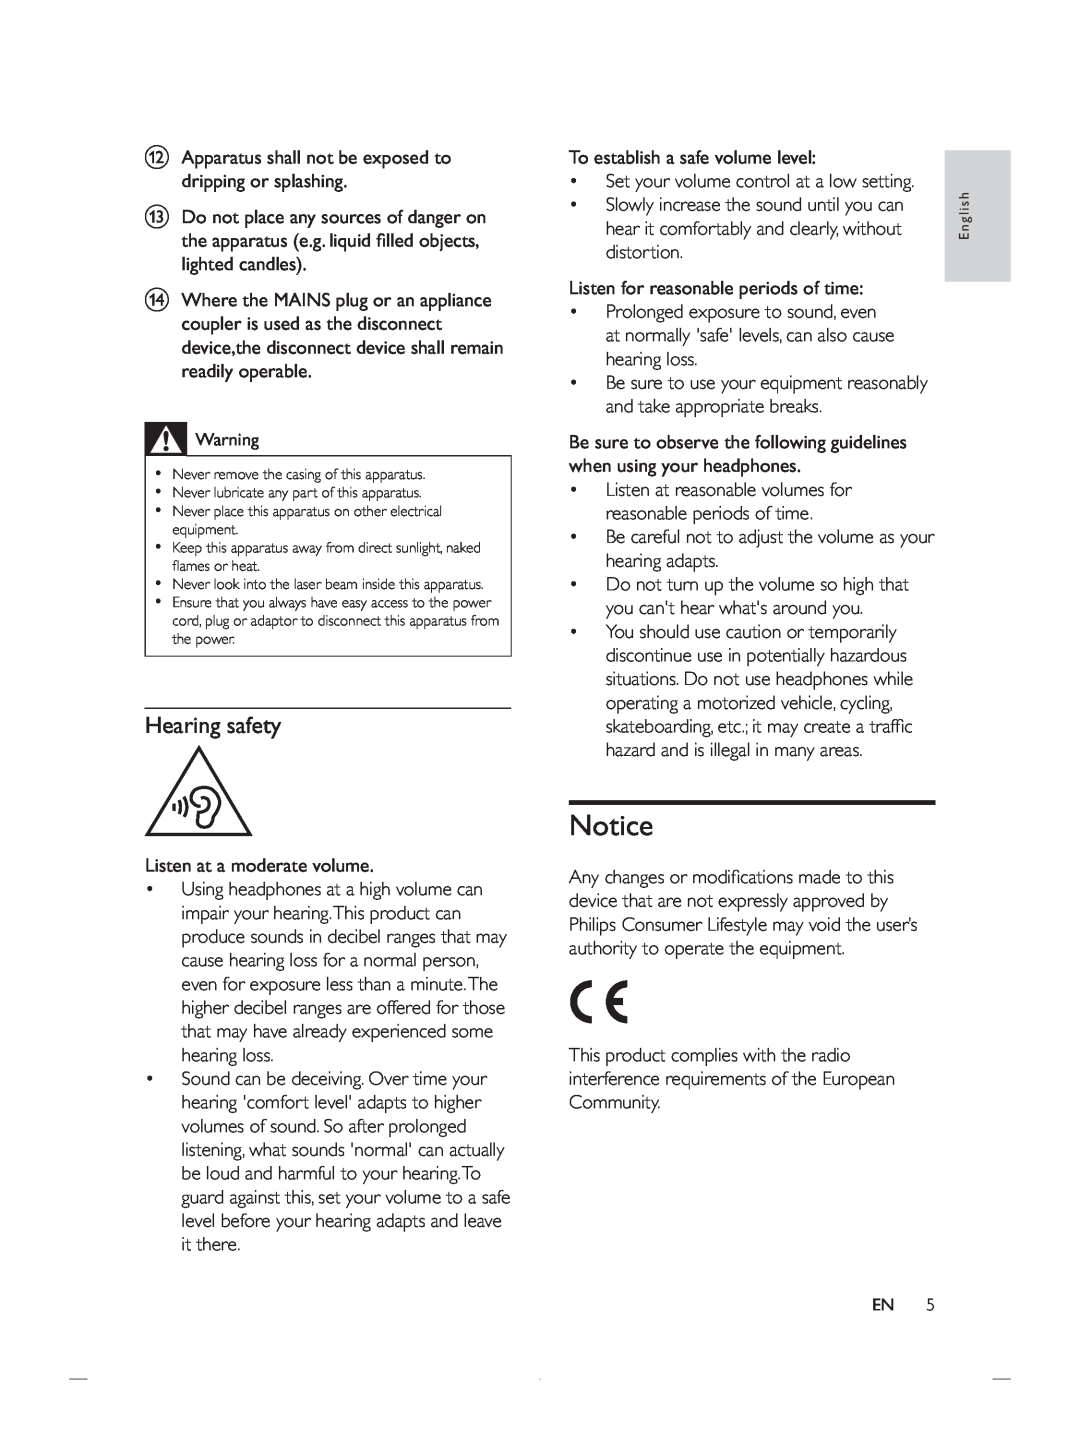 Philips DCB852 user manual Hearing safety 